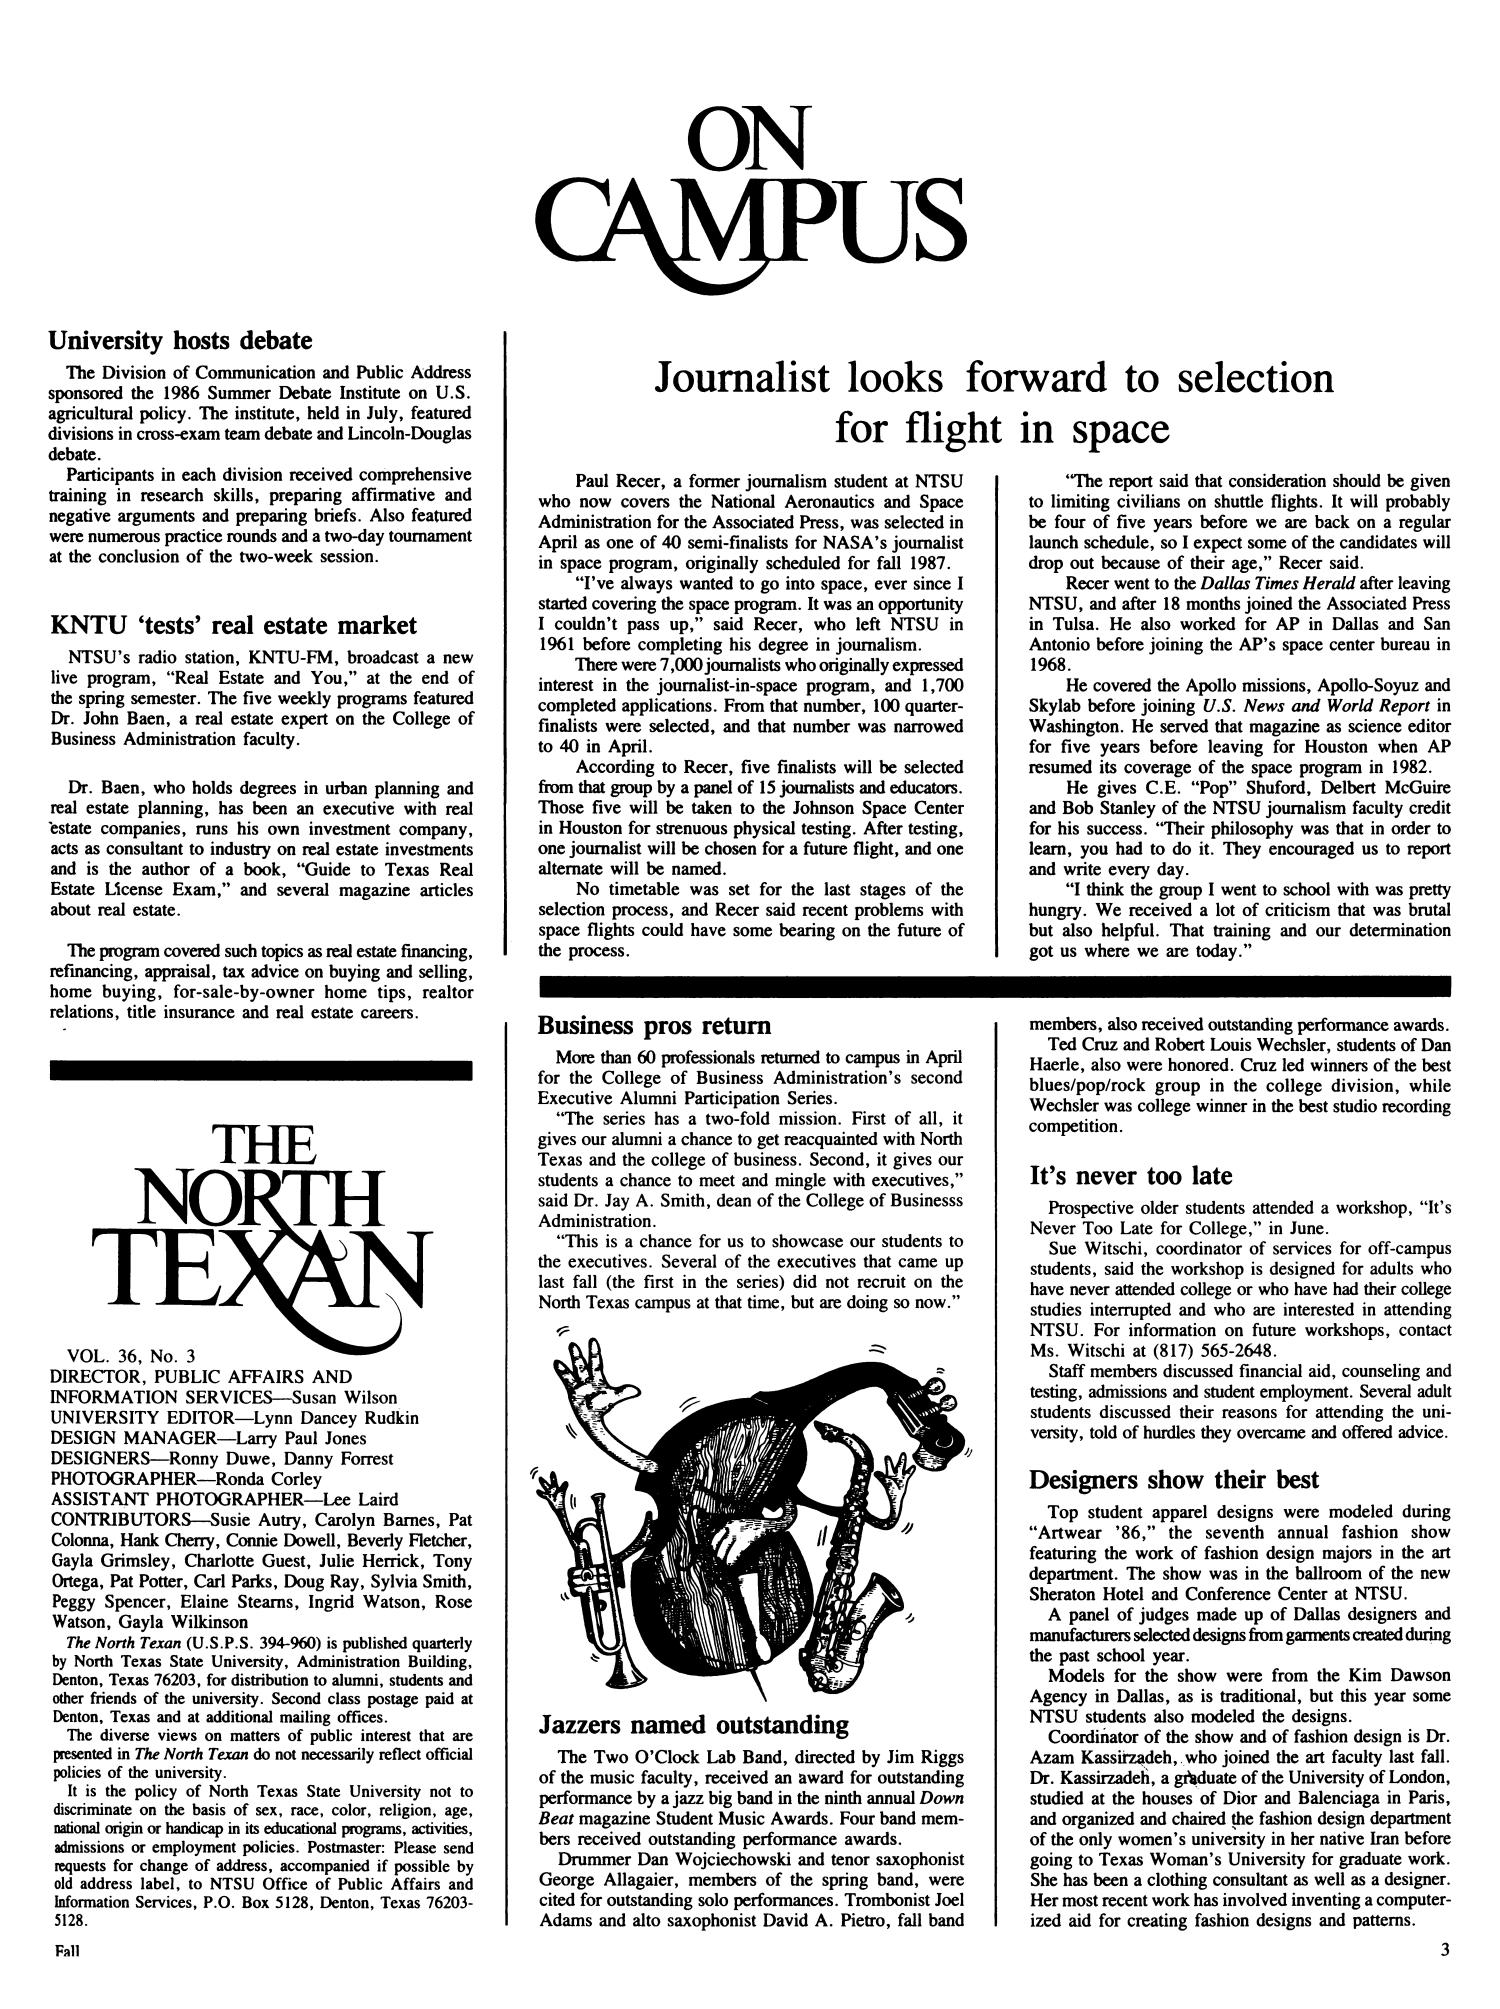 The North Texan, Volume 36, Number 3, Fall 1986
                                                
                                                    3
                                                